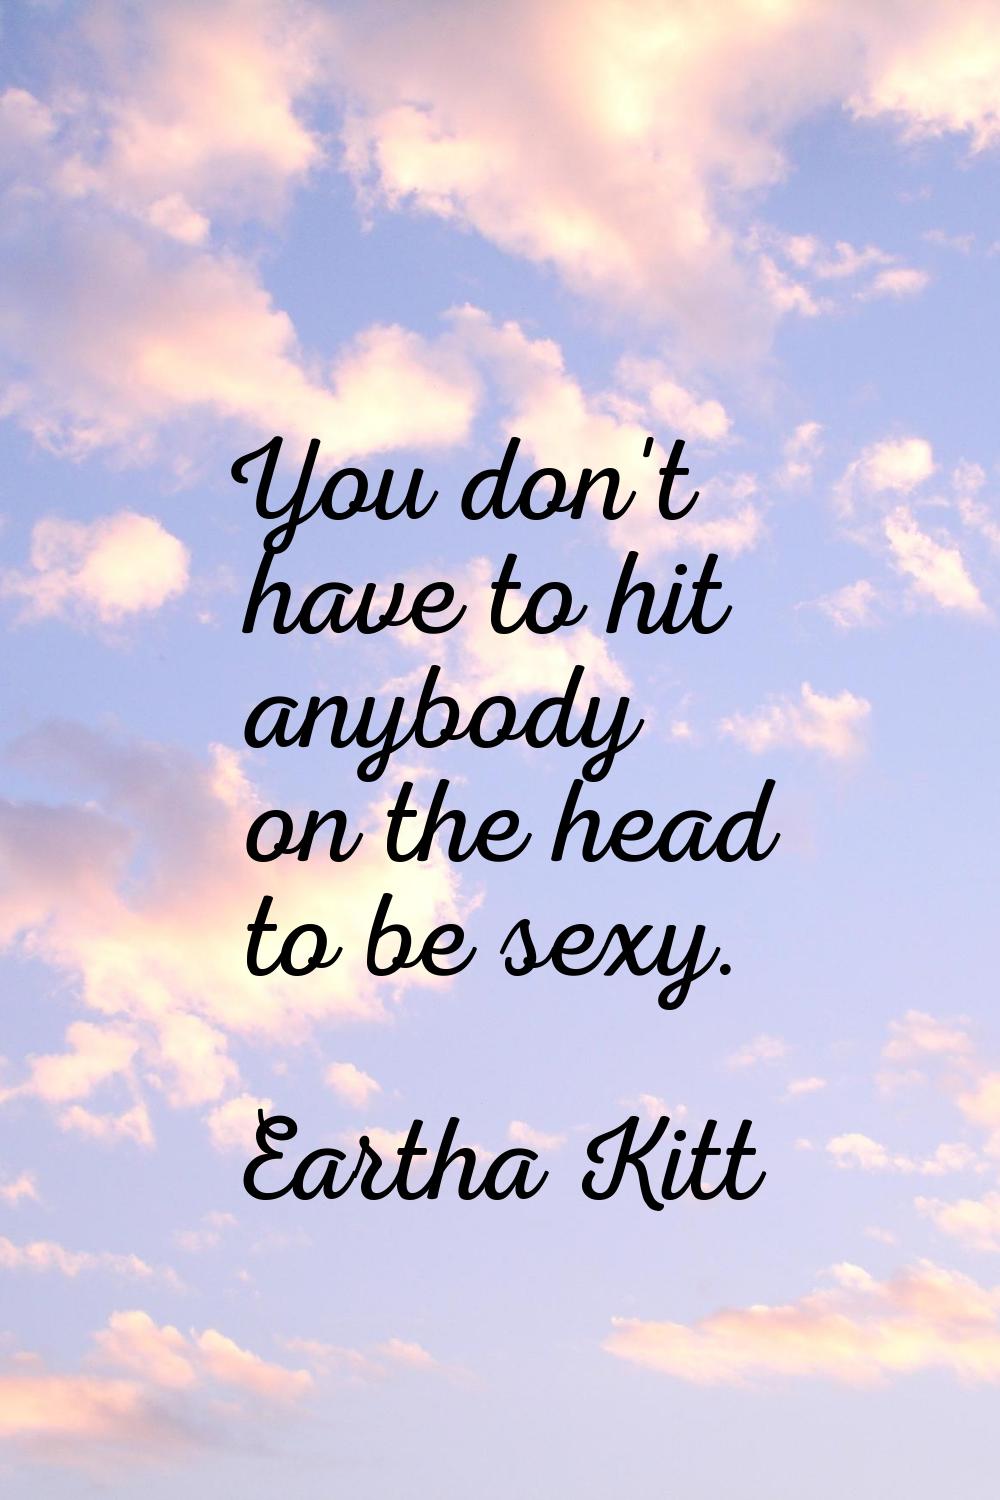 You don't have to hit anybody on the head to be sexy.